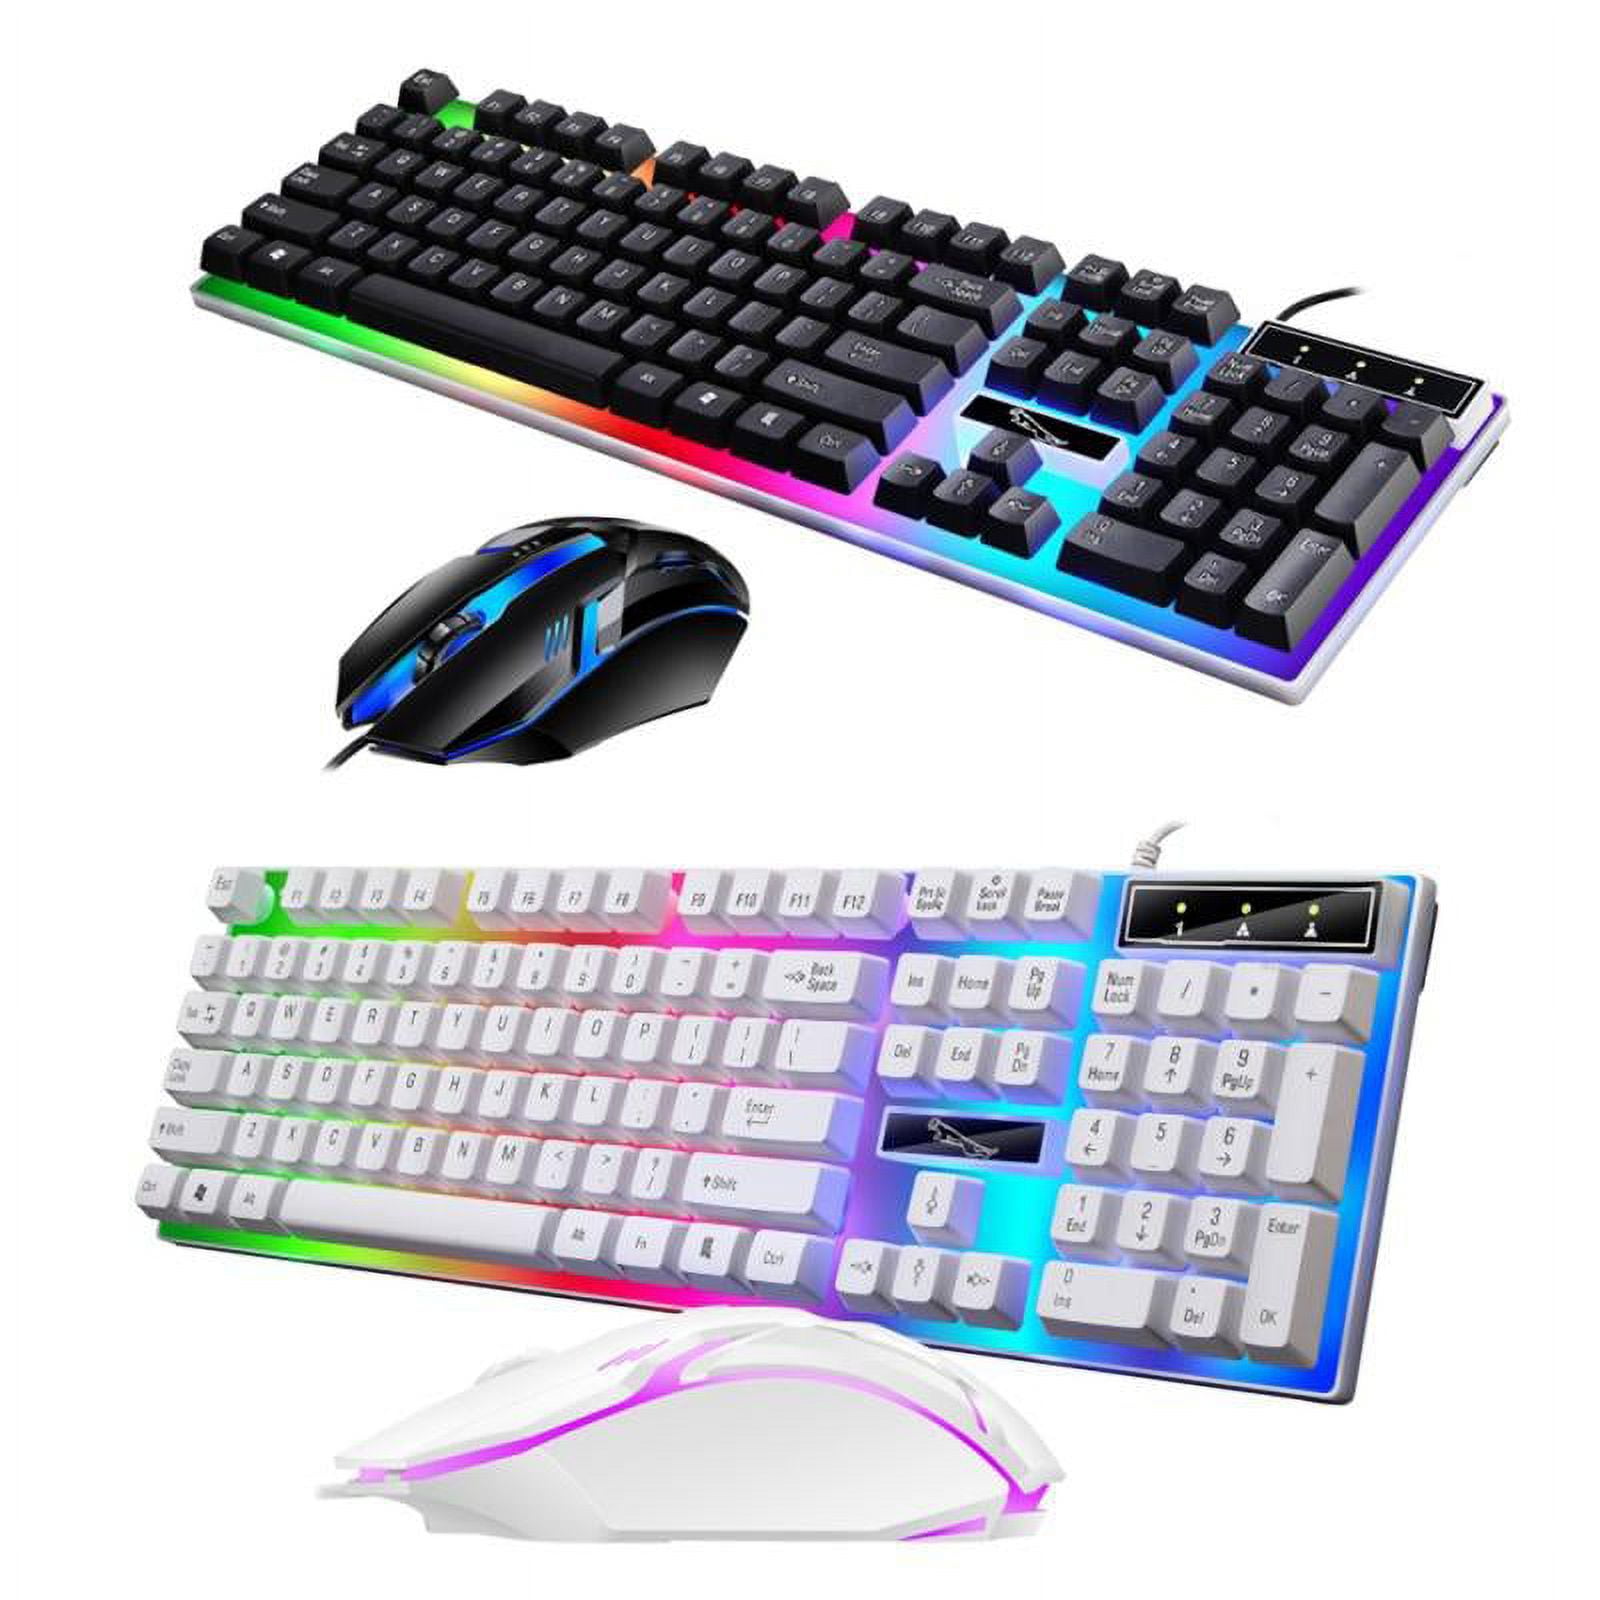 LED Wired Gaming Keyboard Mouse Combo Set,USB Wired 104 Key Gaming Keyboard  + RGB Gaming Mouse for PS4/PS3/Xbox One And 360 